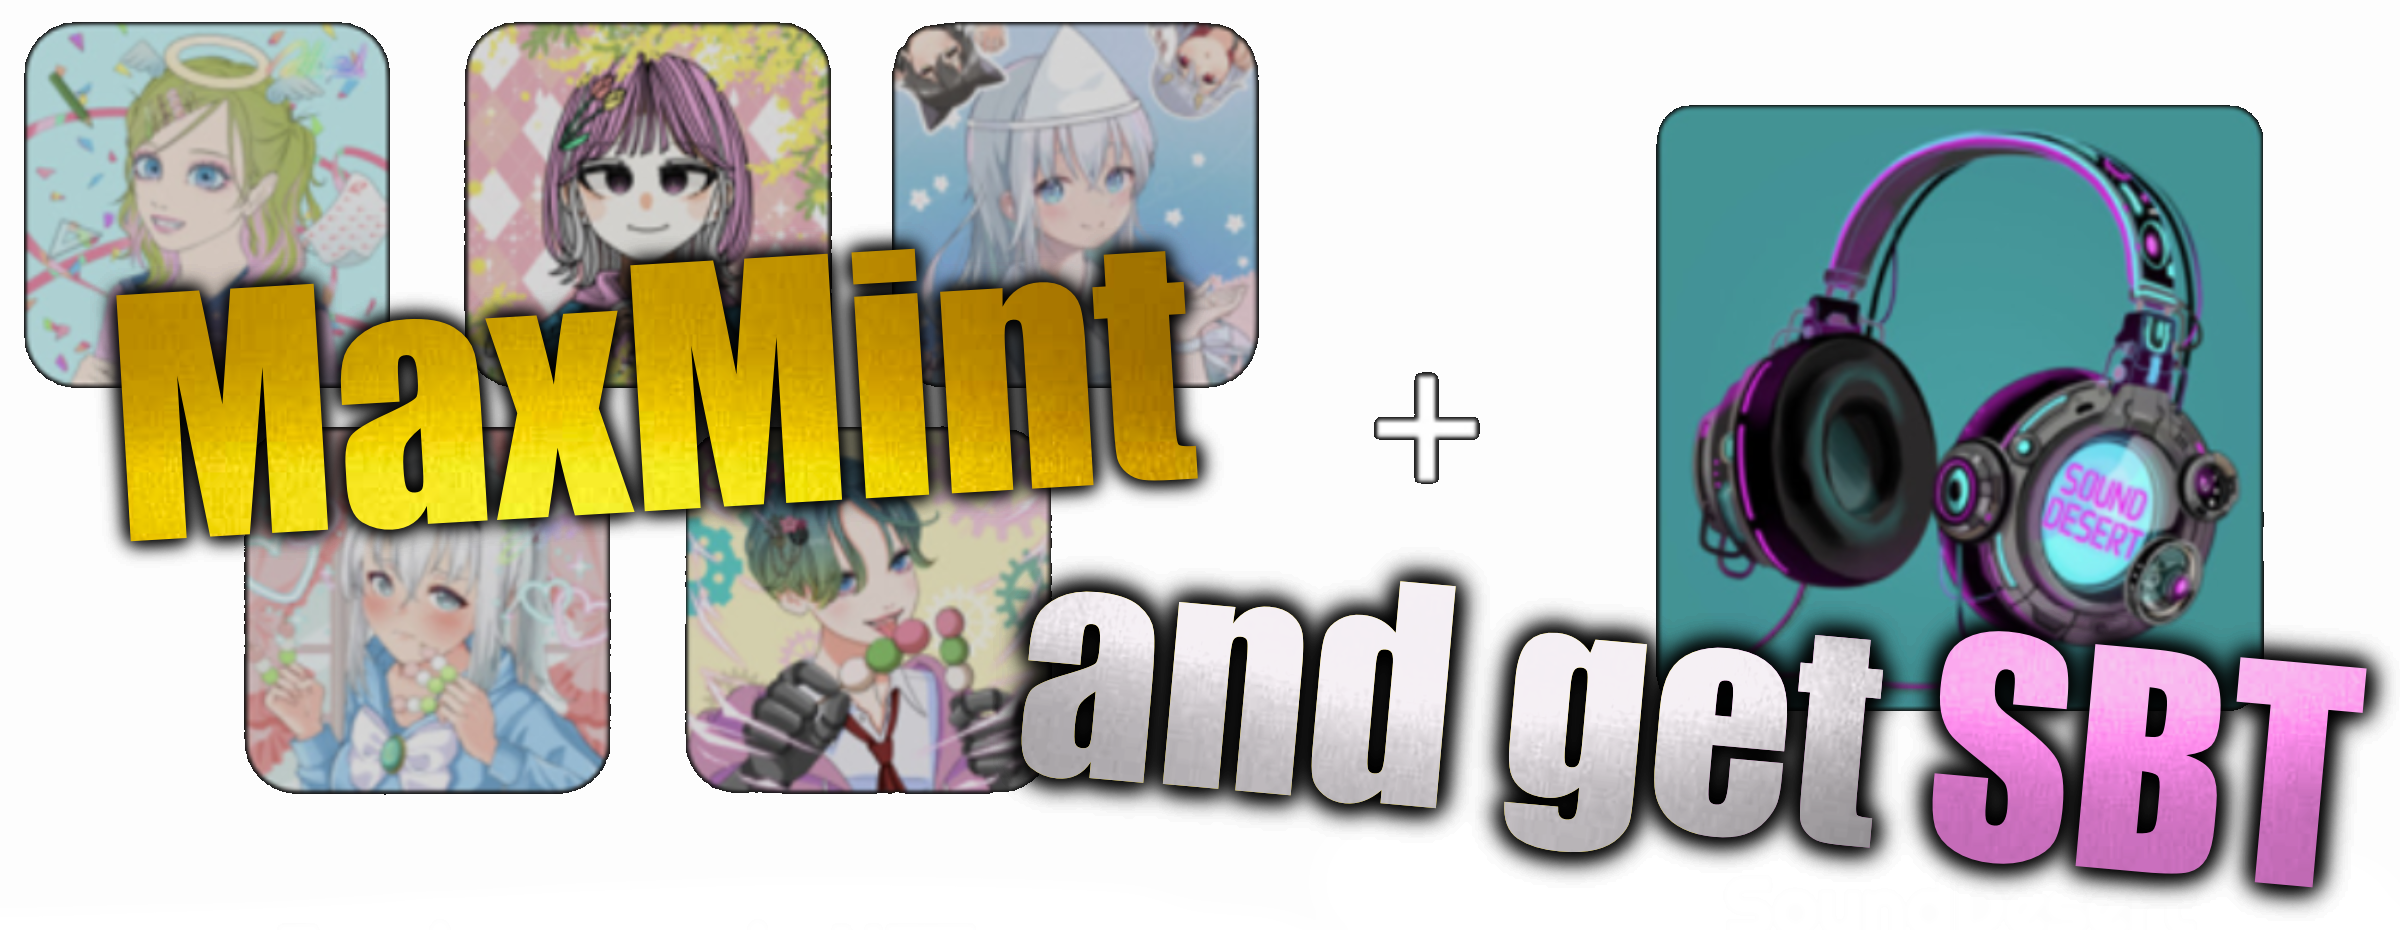 MaxMint and get SBT